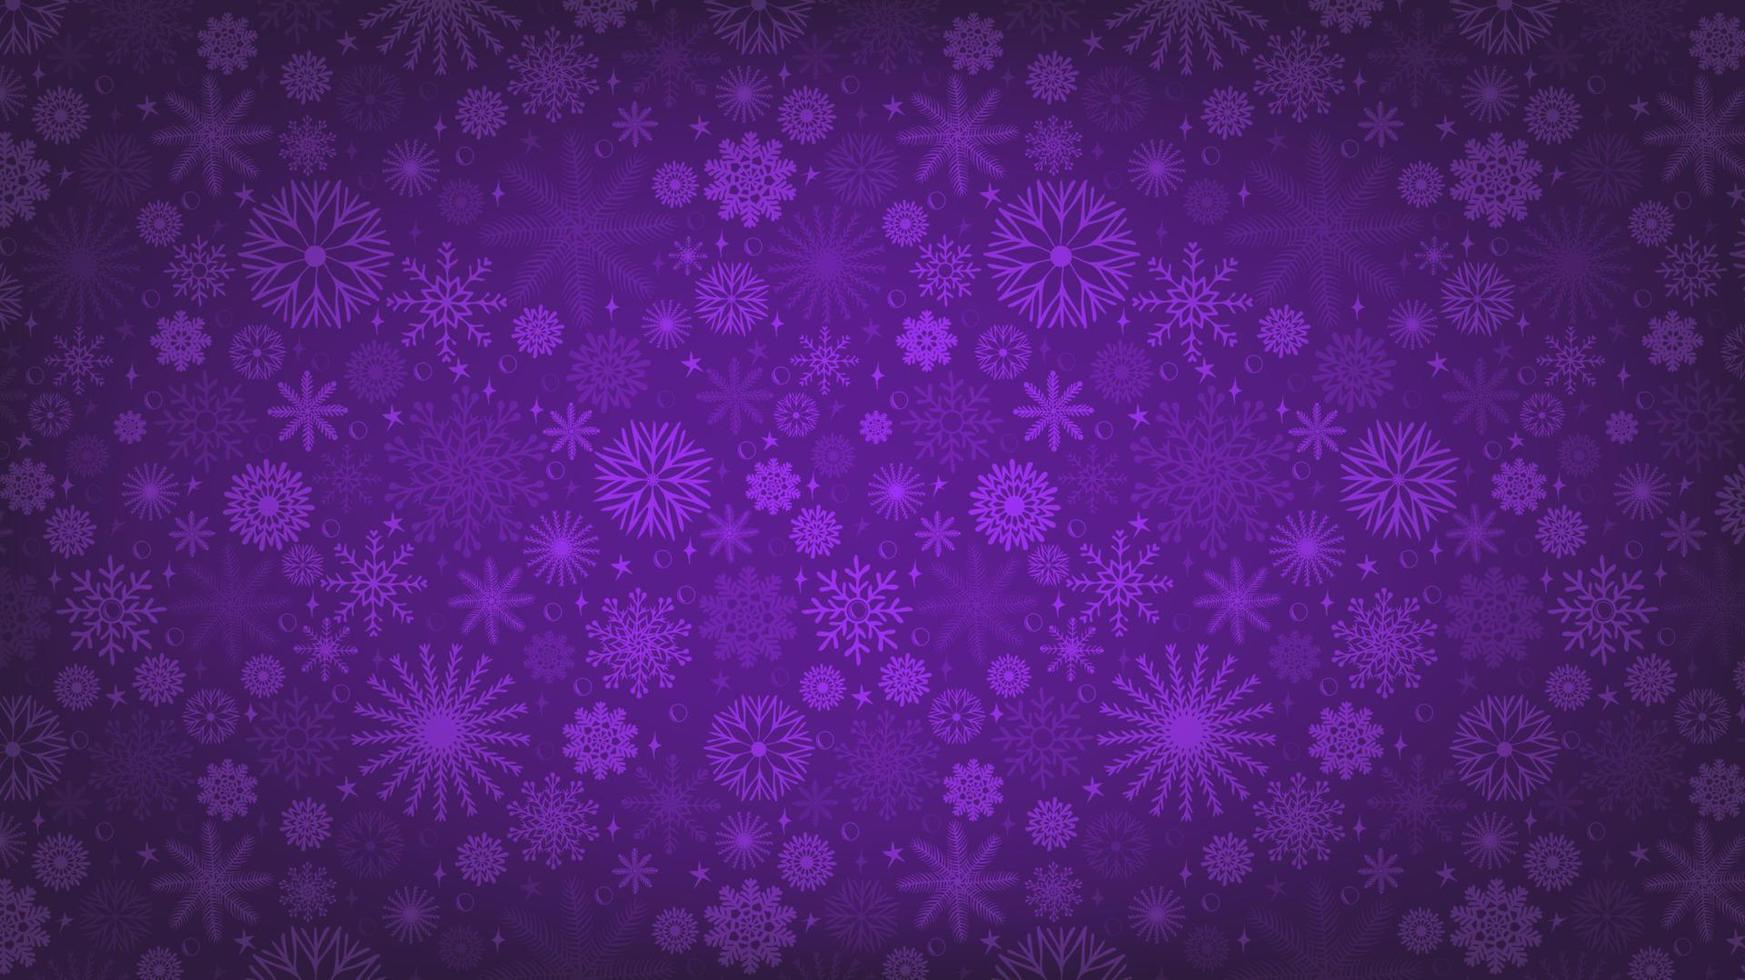 Snowy purple background. Christmas winter design. Falling snowflakes, abstract landscape vector